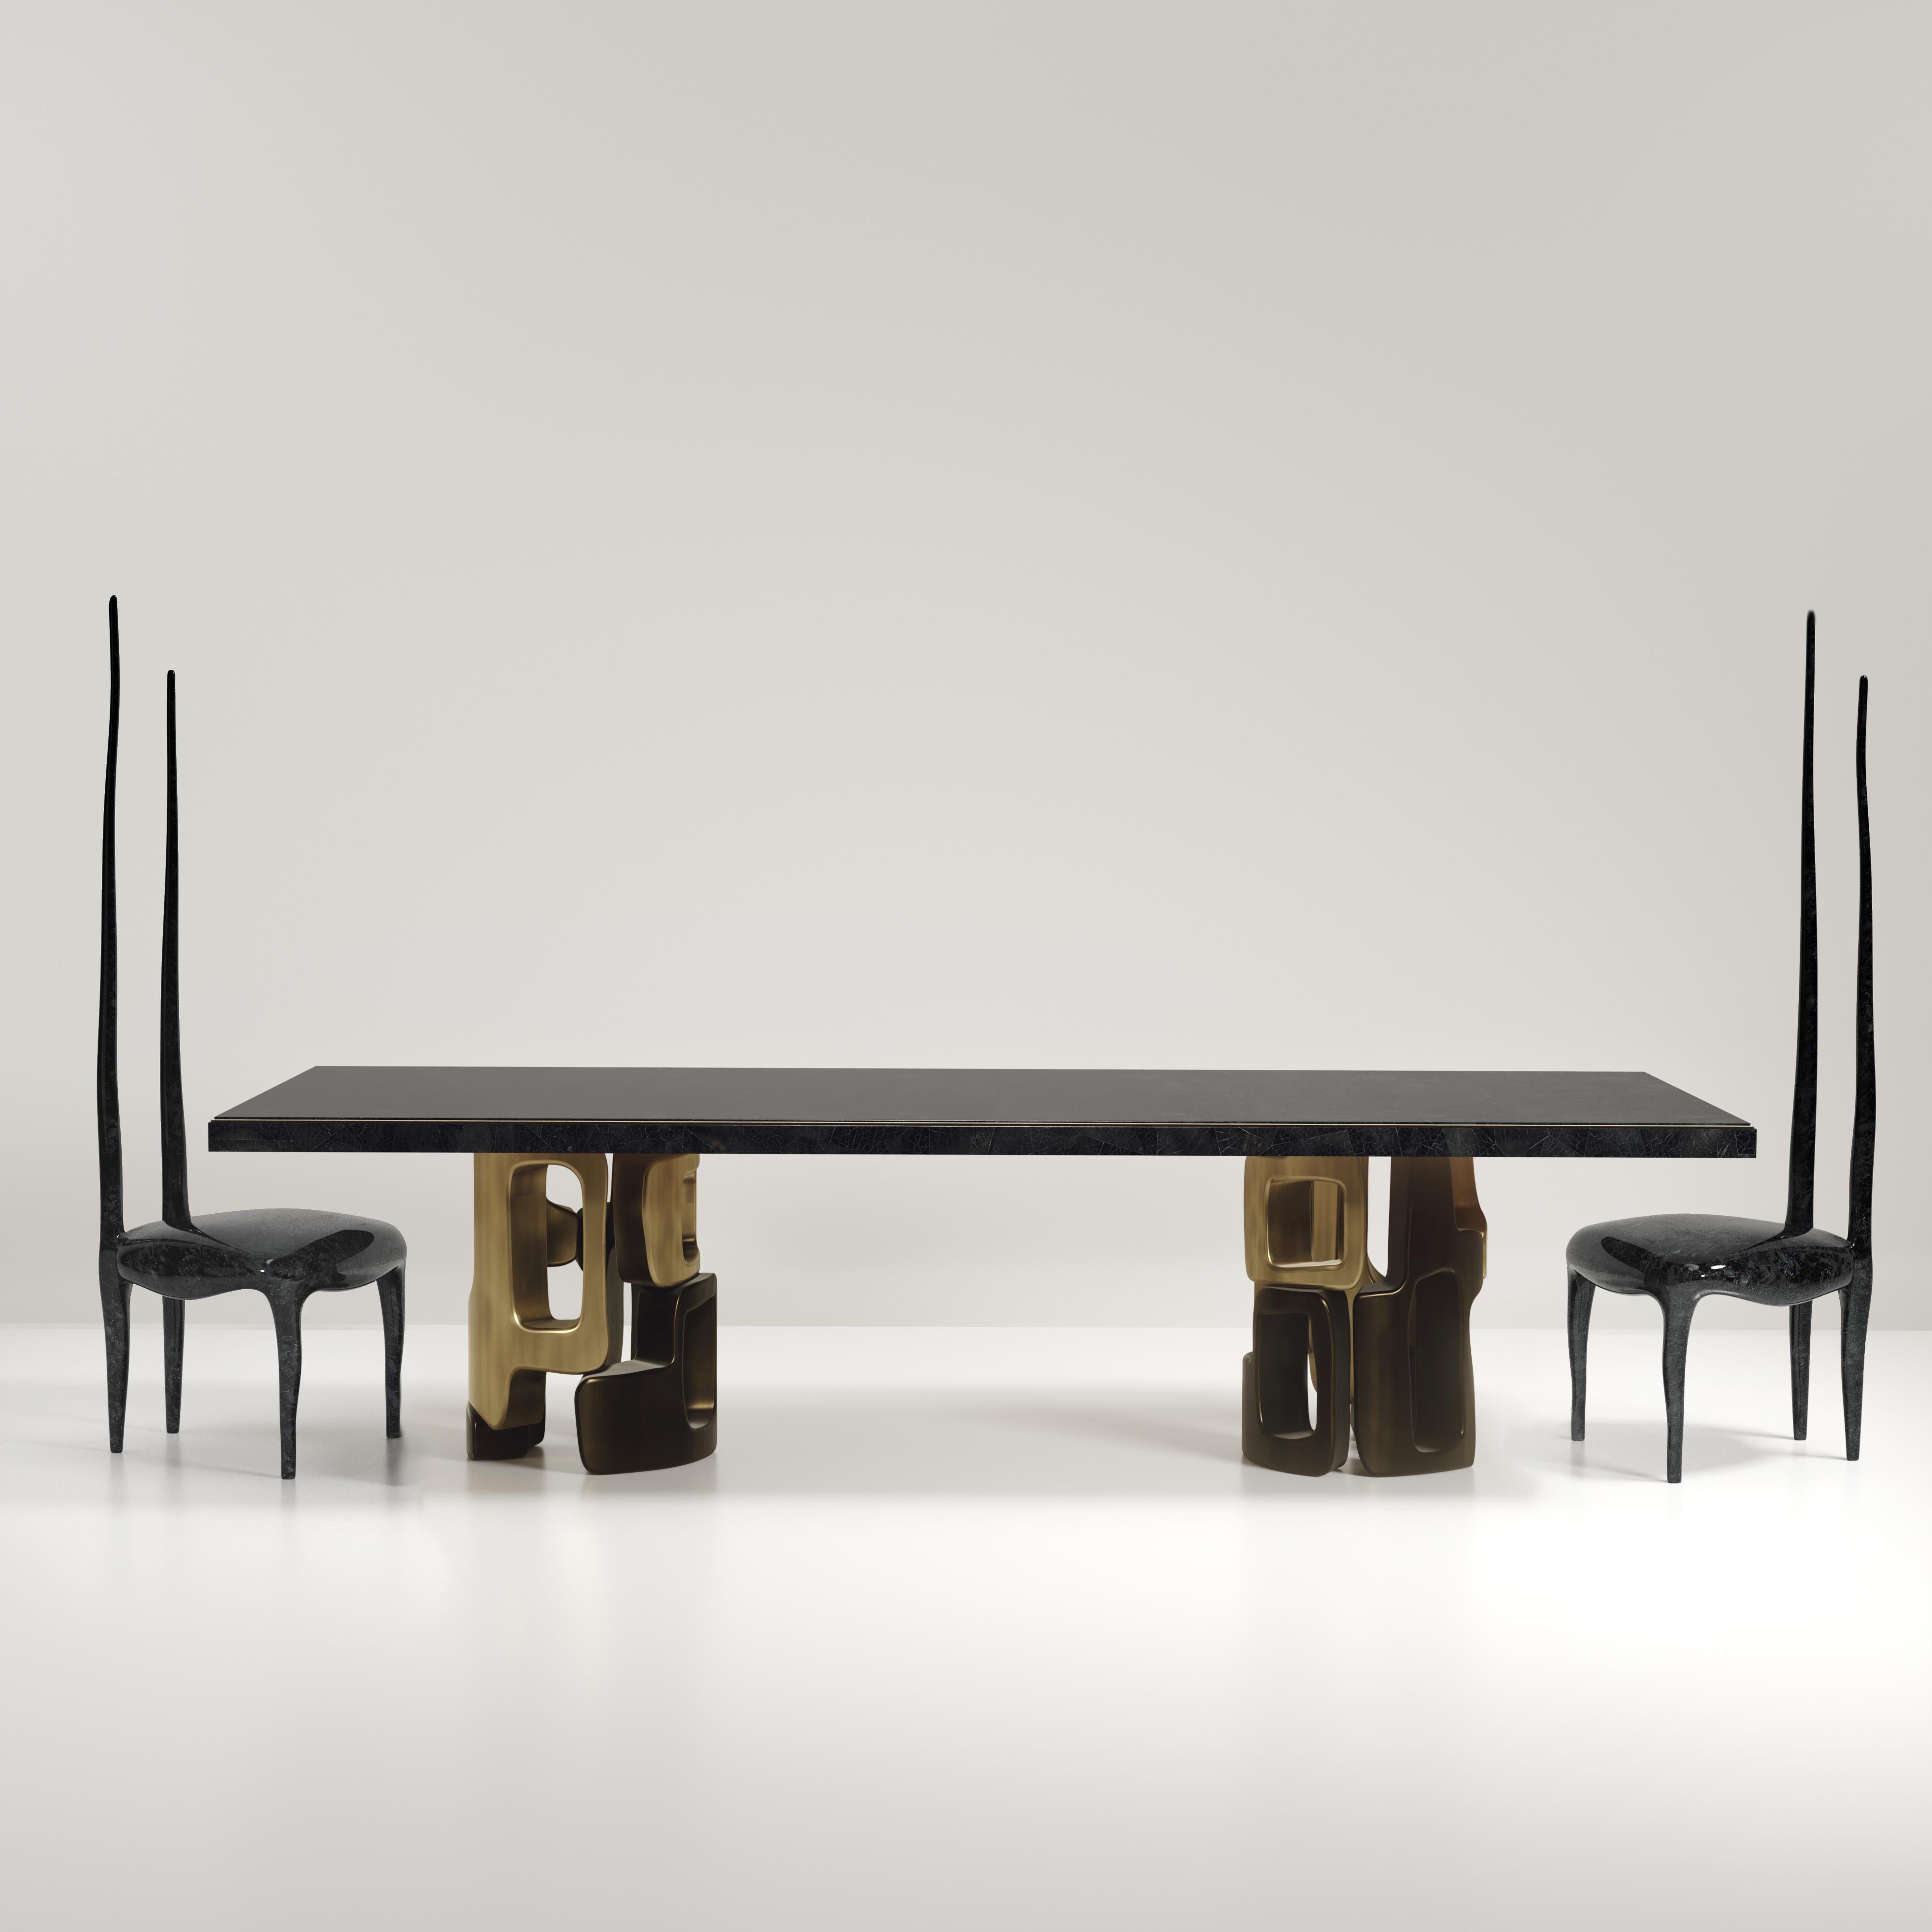 The Apoli I dining table by Kifu Paris is both dramatic and organic its unique design. The black pen shell inlaid top sits on a pair of geometric and sculptural bronze-patina brass bases. This piece is designed by Kifu Augousti the daughter of Ria